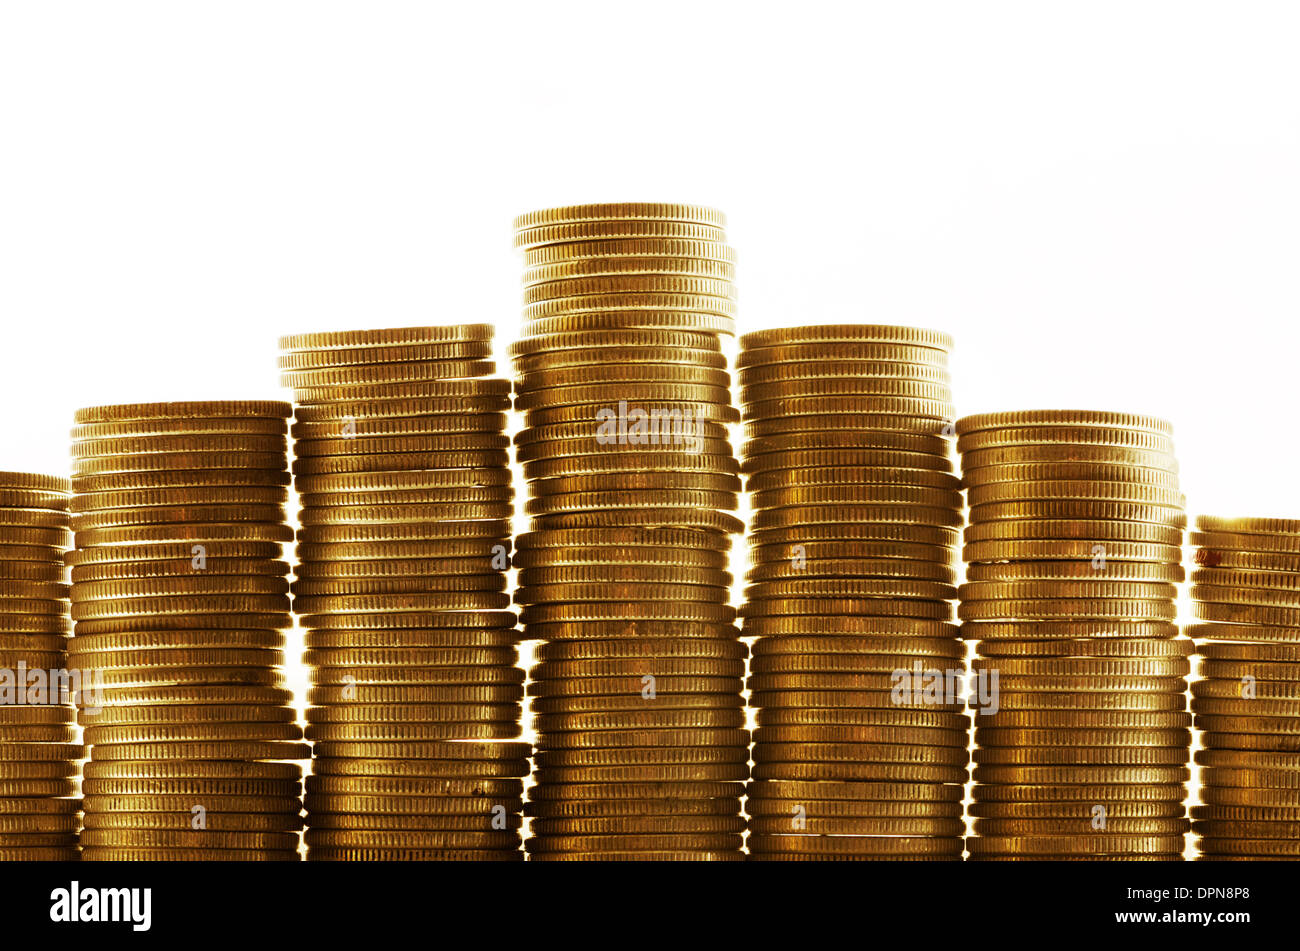 Golden coins in high stacks Stock Photo